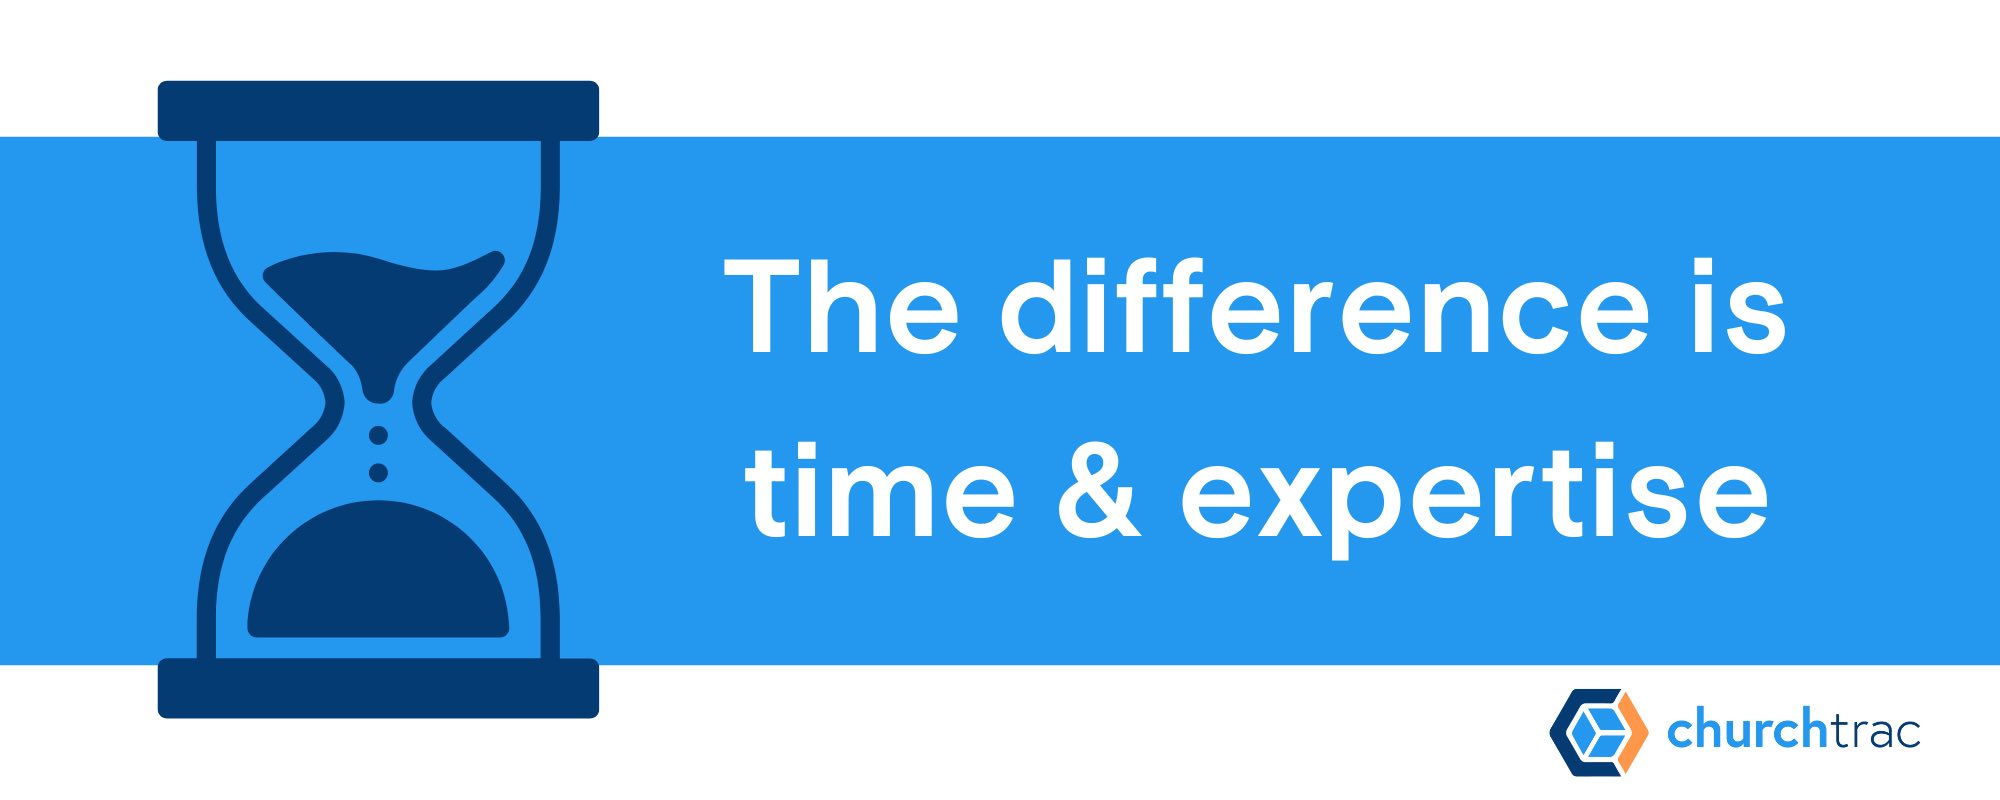 The difference between in-kind goods and in-kind services is time and expertise